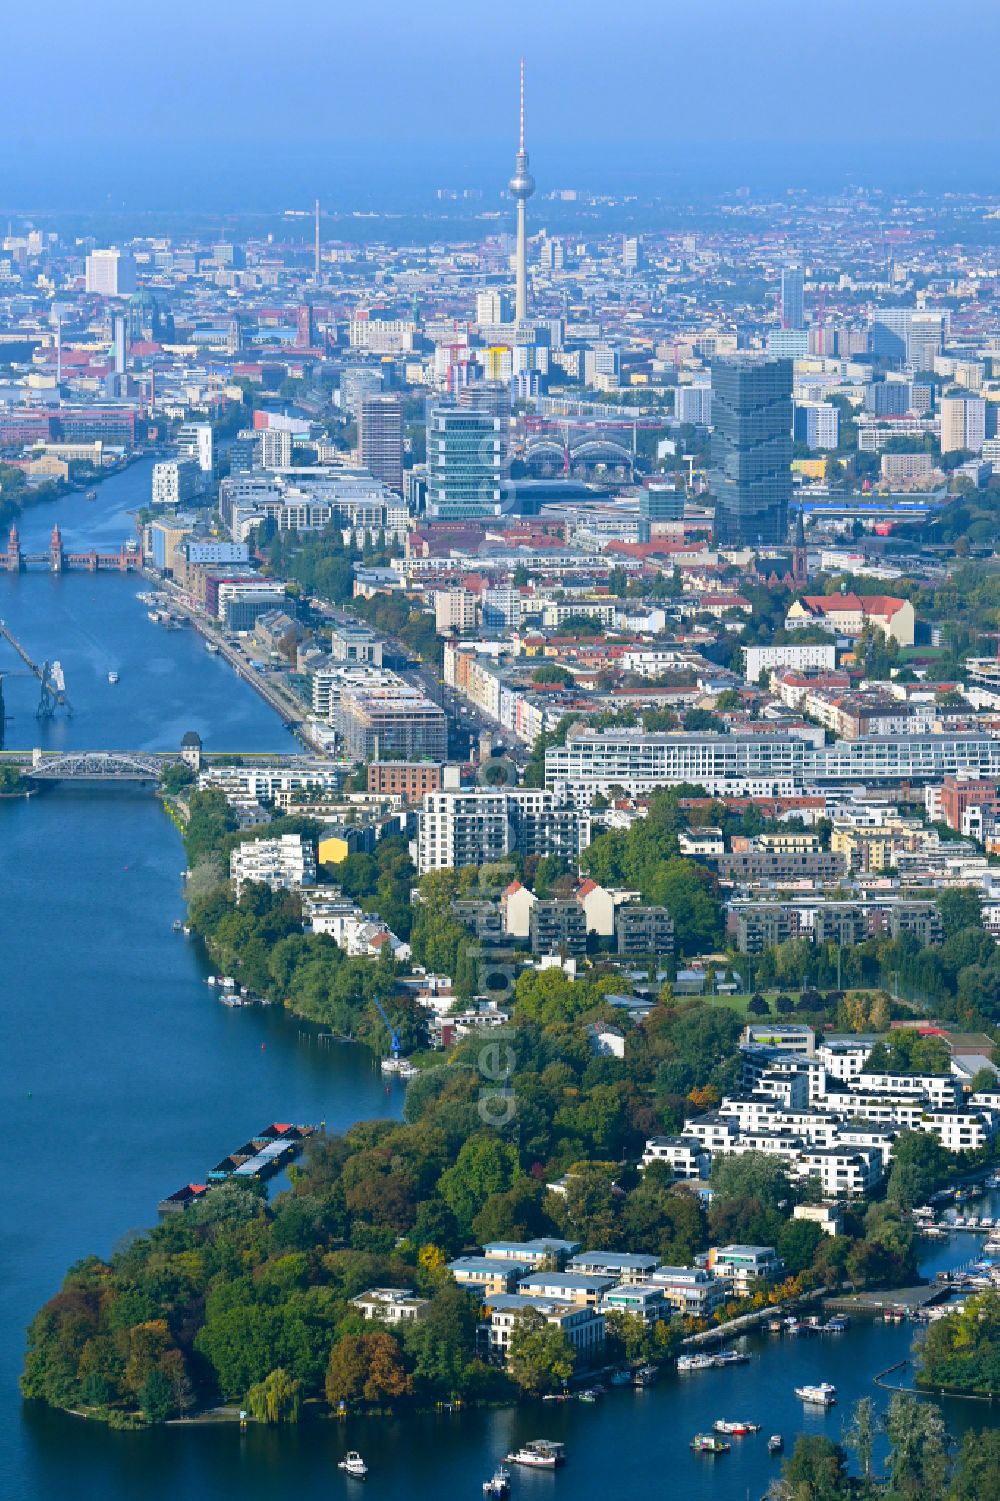 Aerial image Berlin - Residential house development on the peninsula Stralau between Spree- river and Lake Rummelsburger See in the district Bezirk Friedrichshain in Berlin, Germany